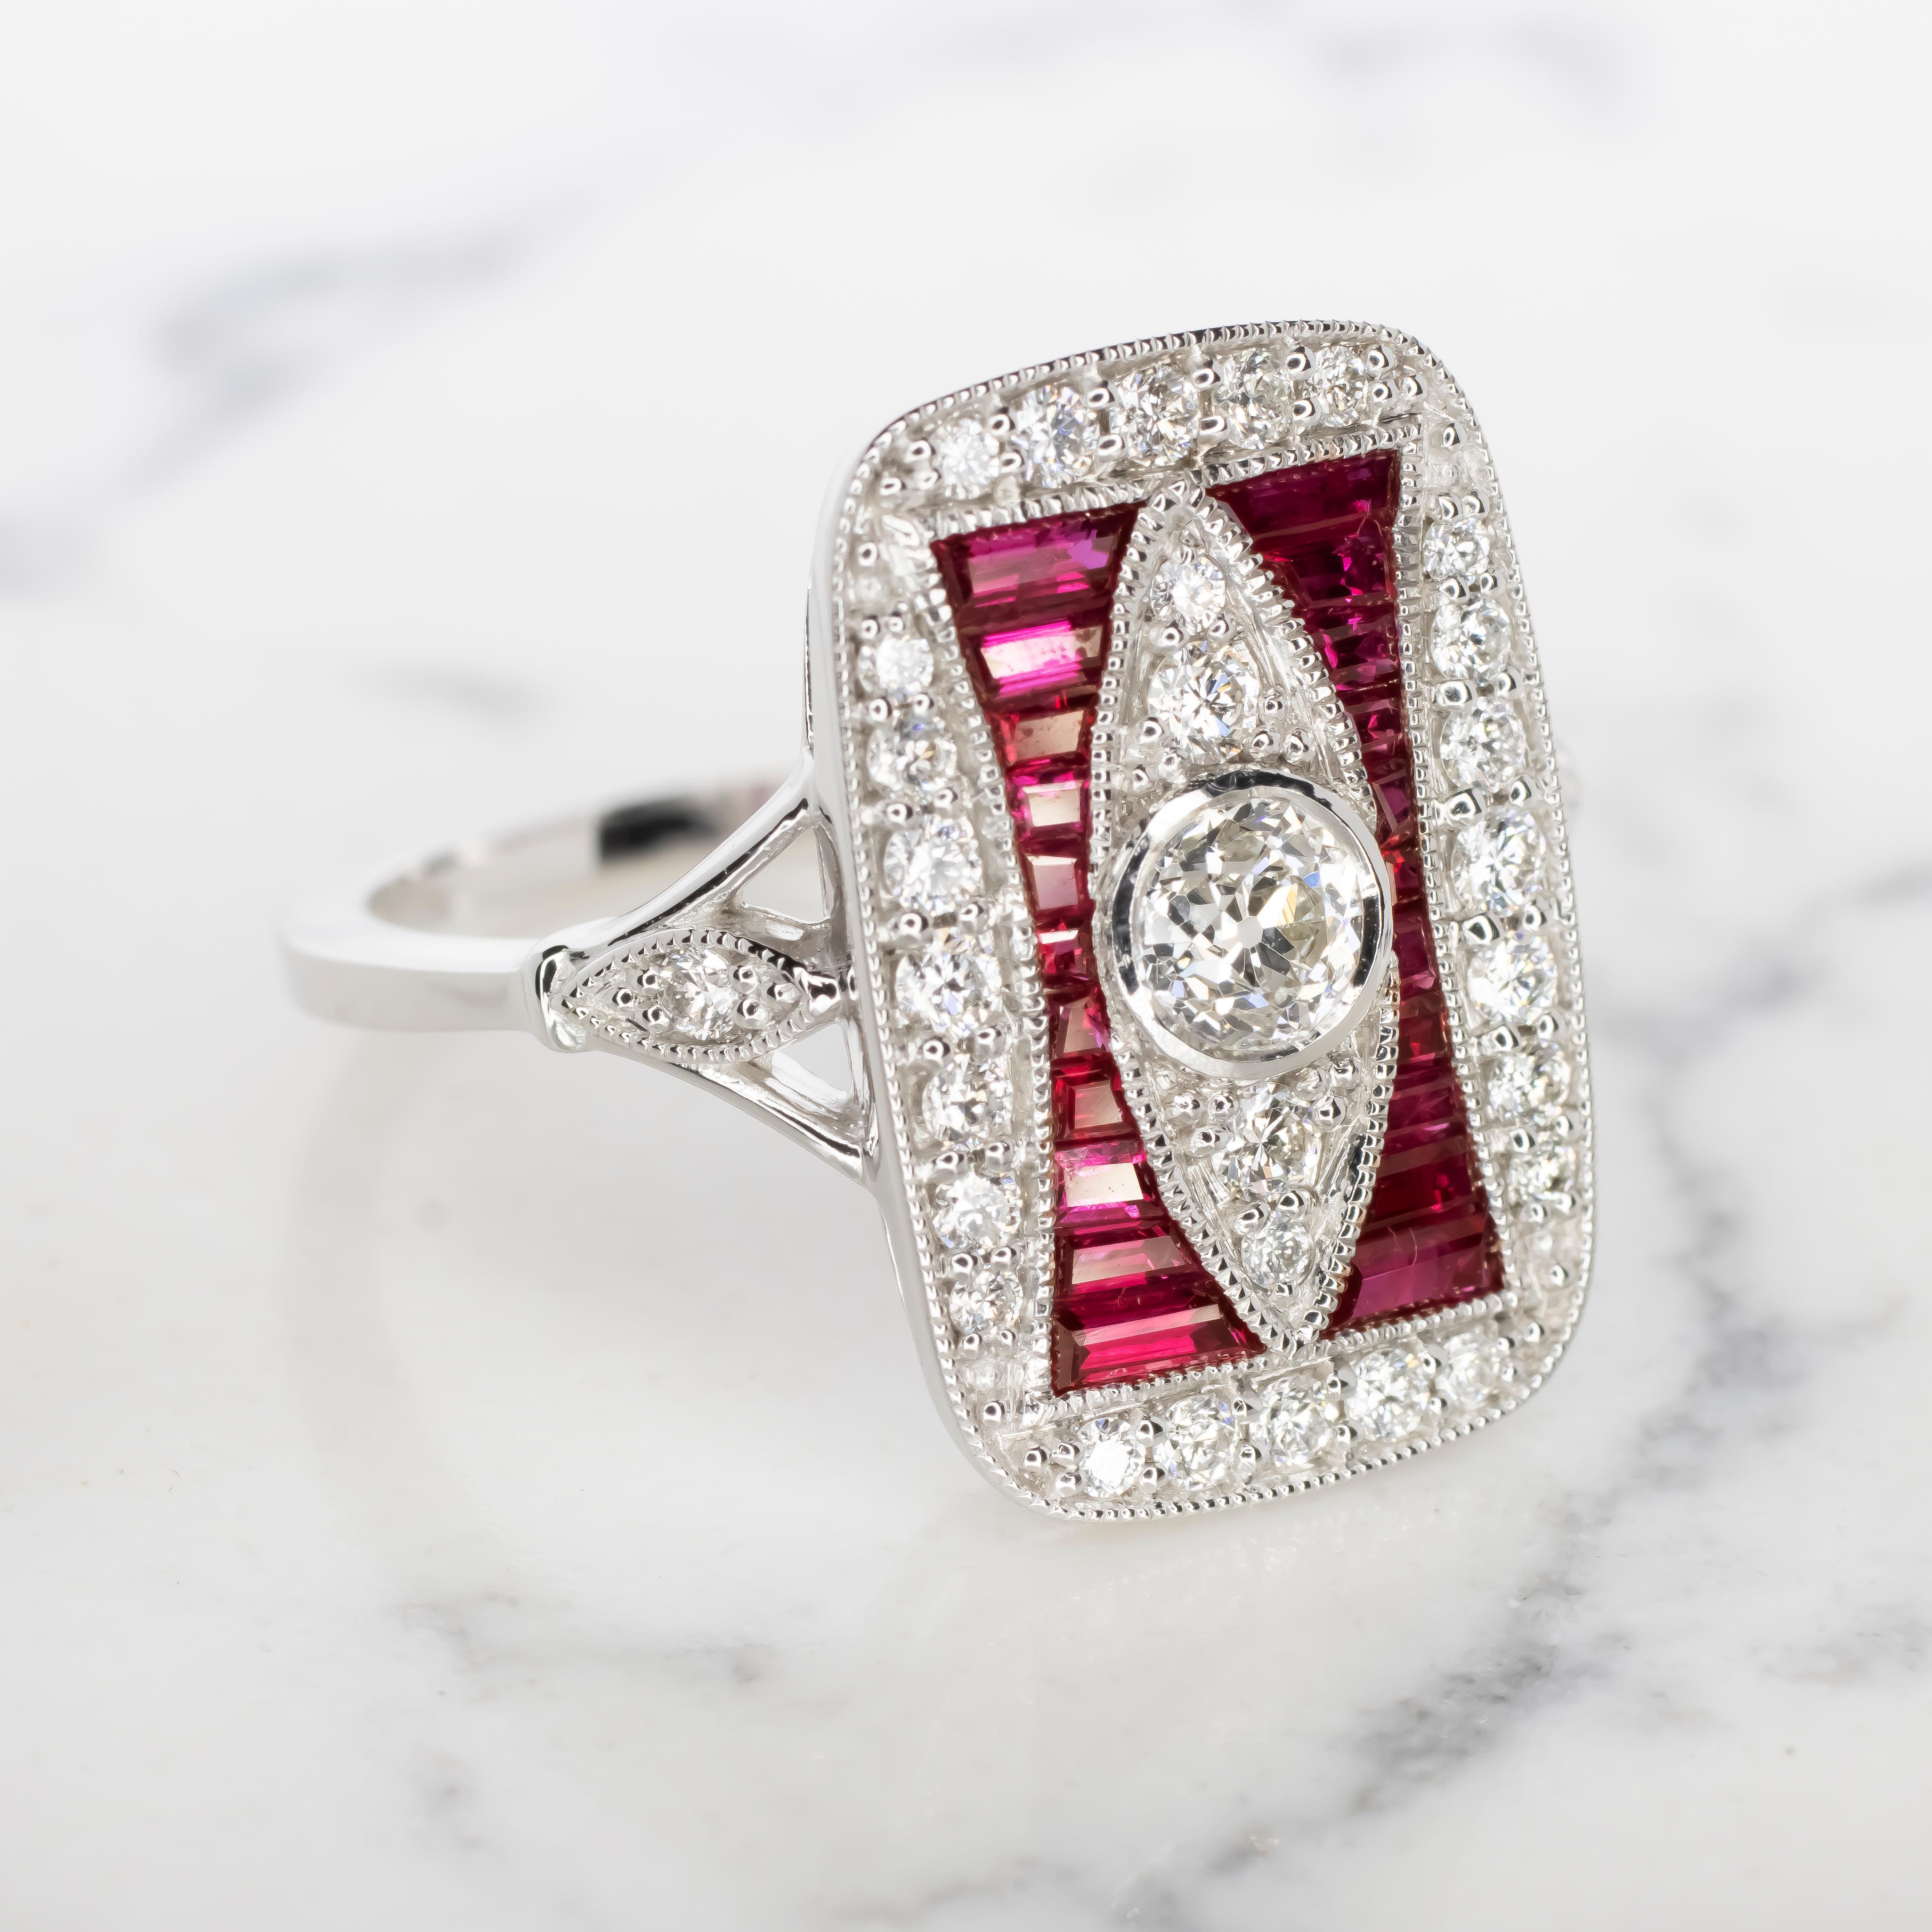 The chic setting is set with brilliantly white and vibrant natural diamonds as well as rich red custom cut natural rubies. Finished with dazzling diamonds and fine milgrain details, this bezel setting provides the perfect backdrop for a diamond or